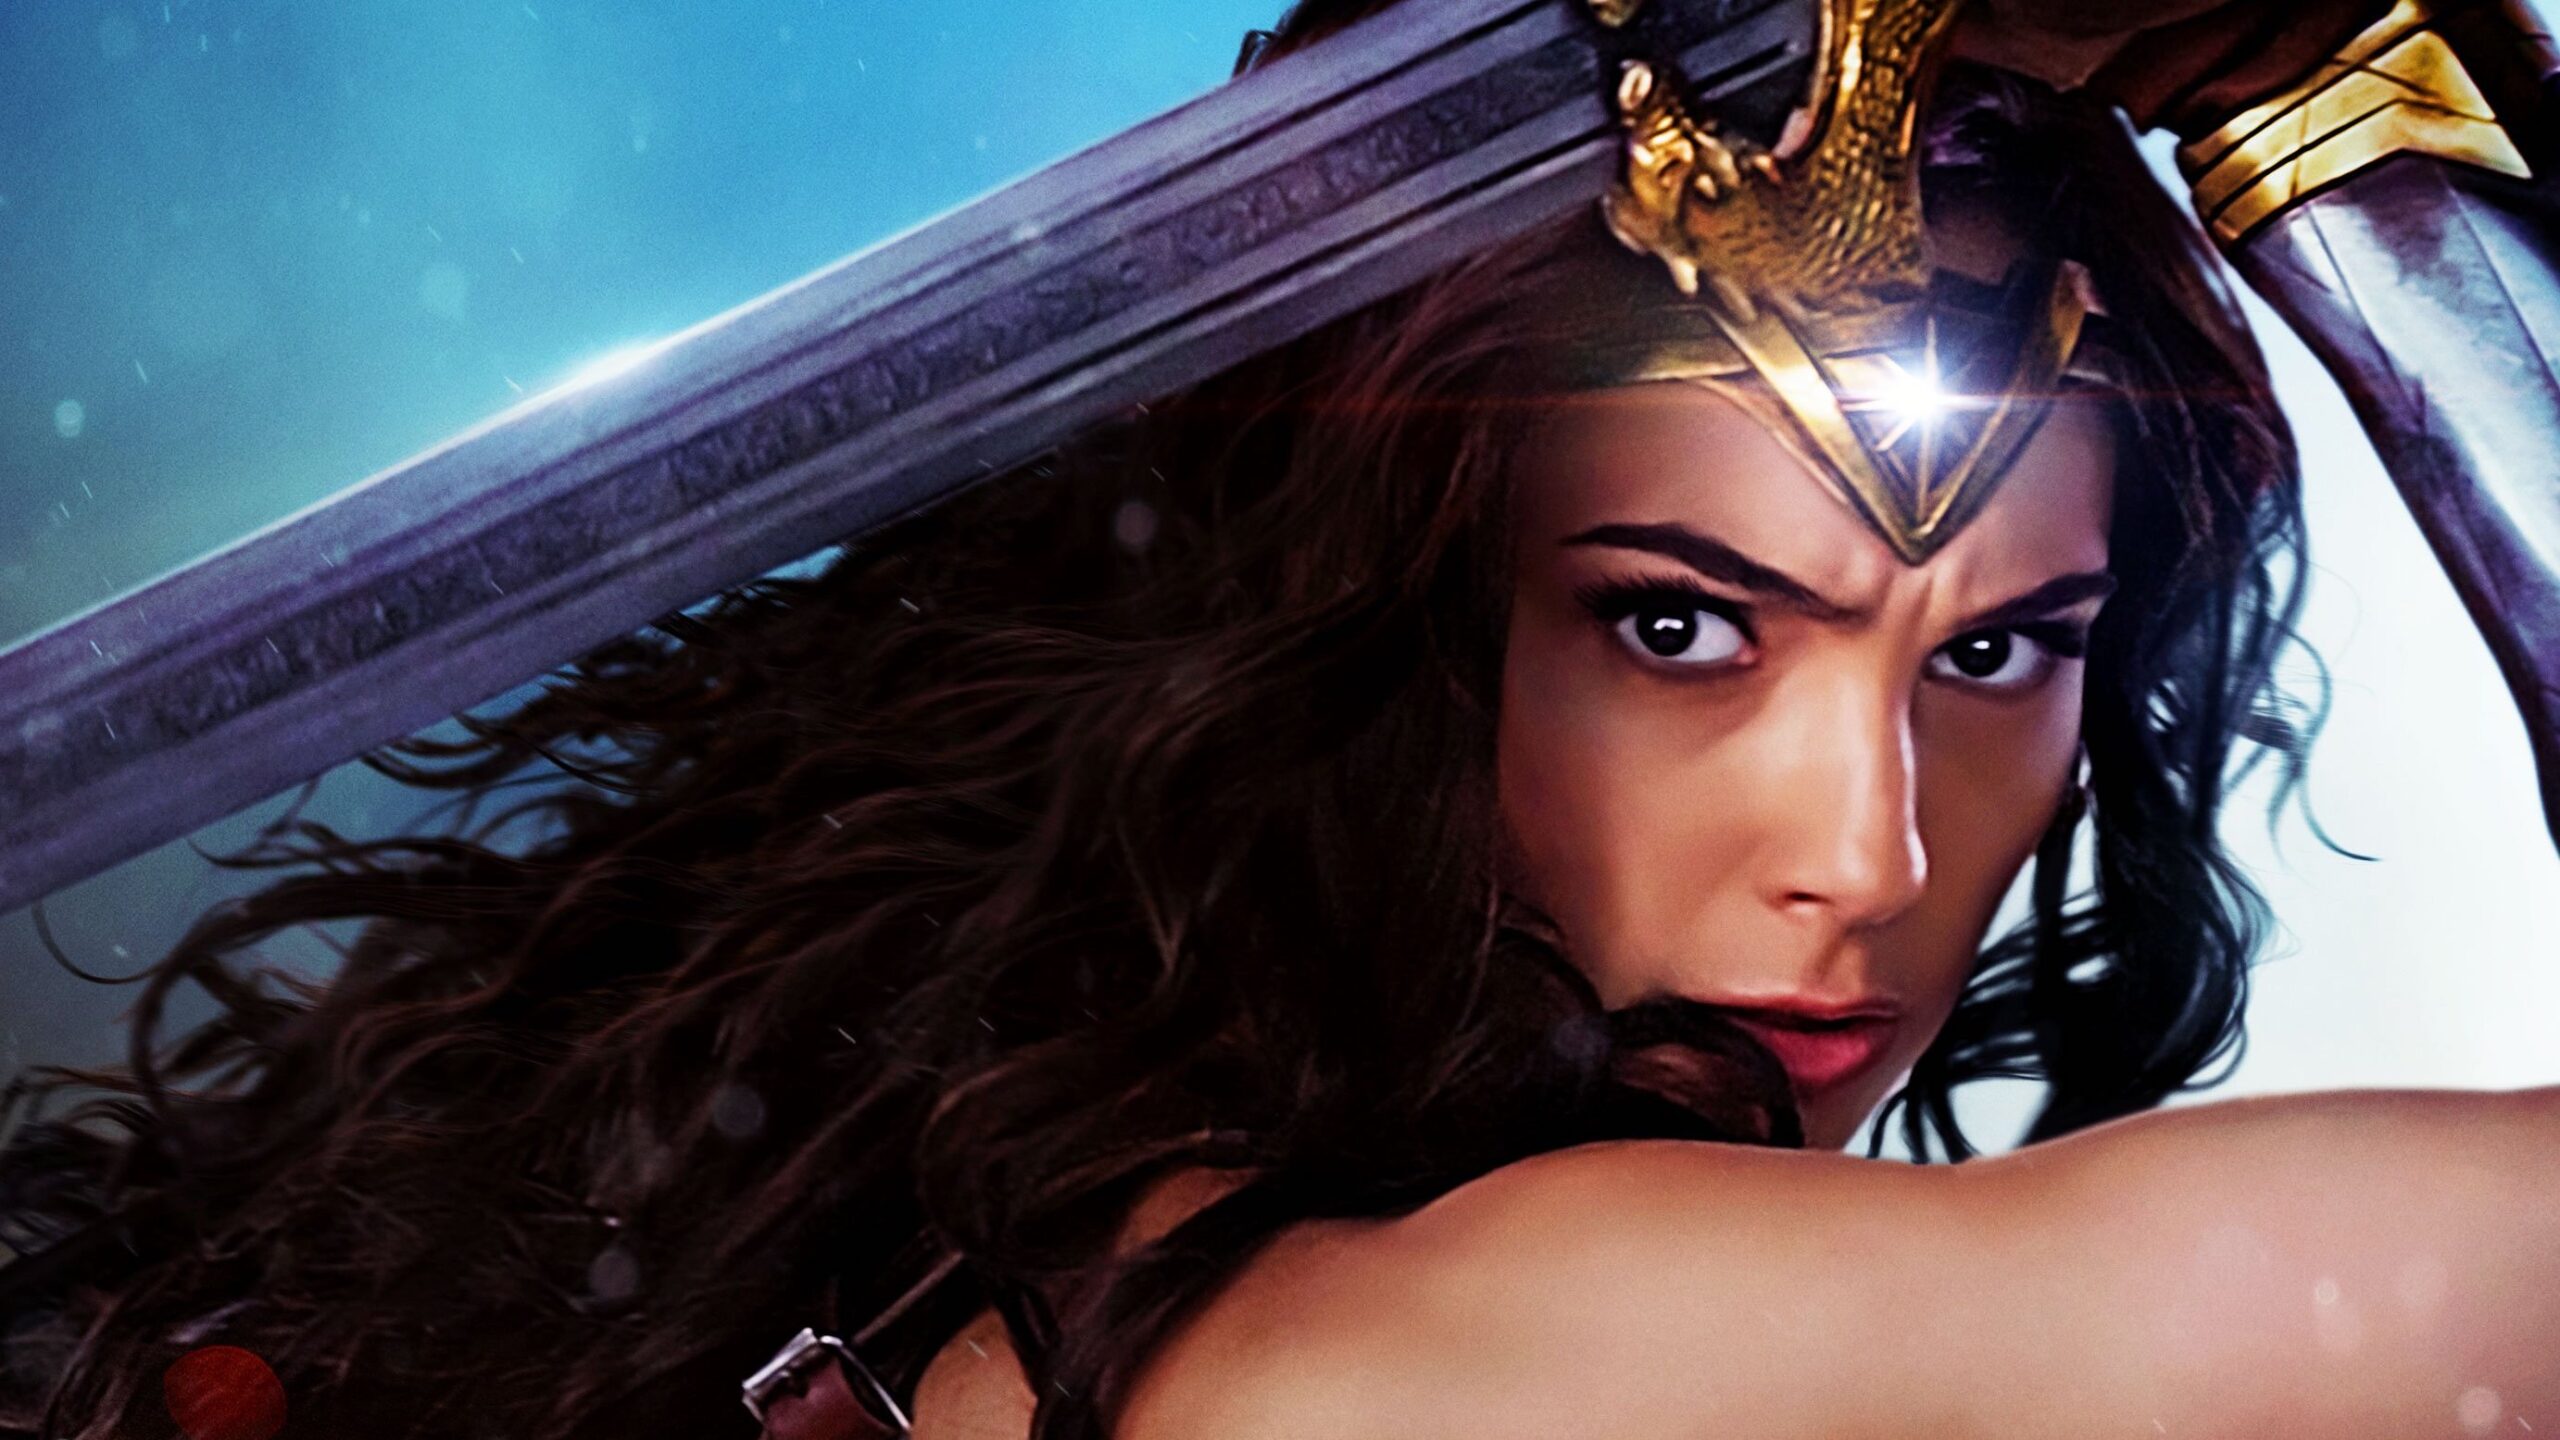 Wonder Woman 3 Might Not Happen In The DCU After All